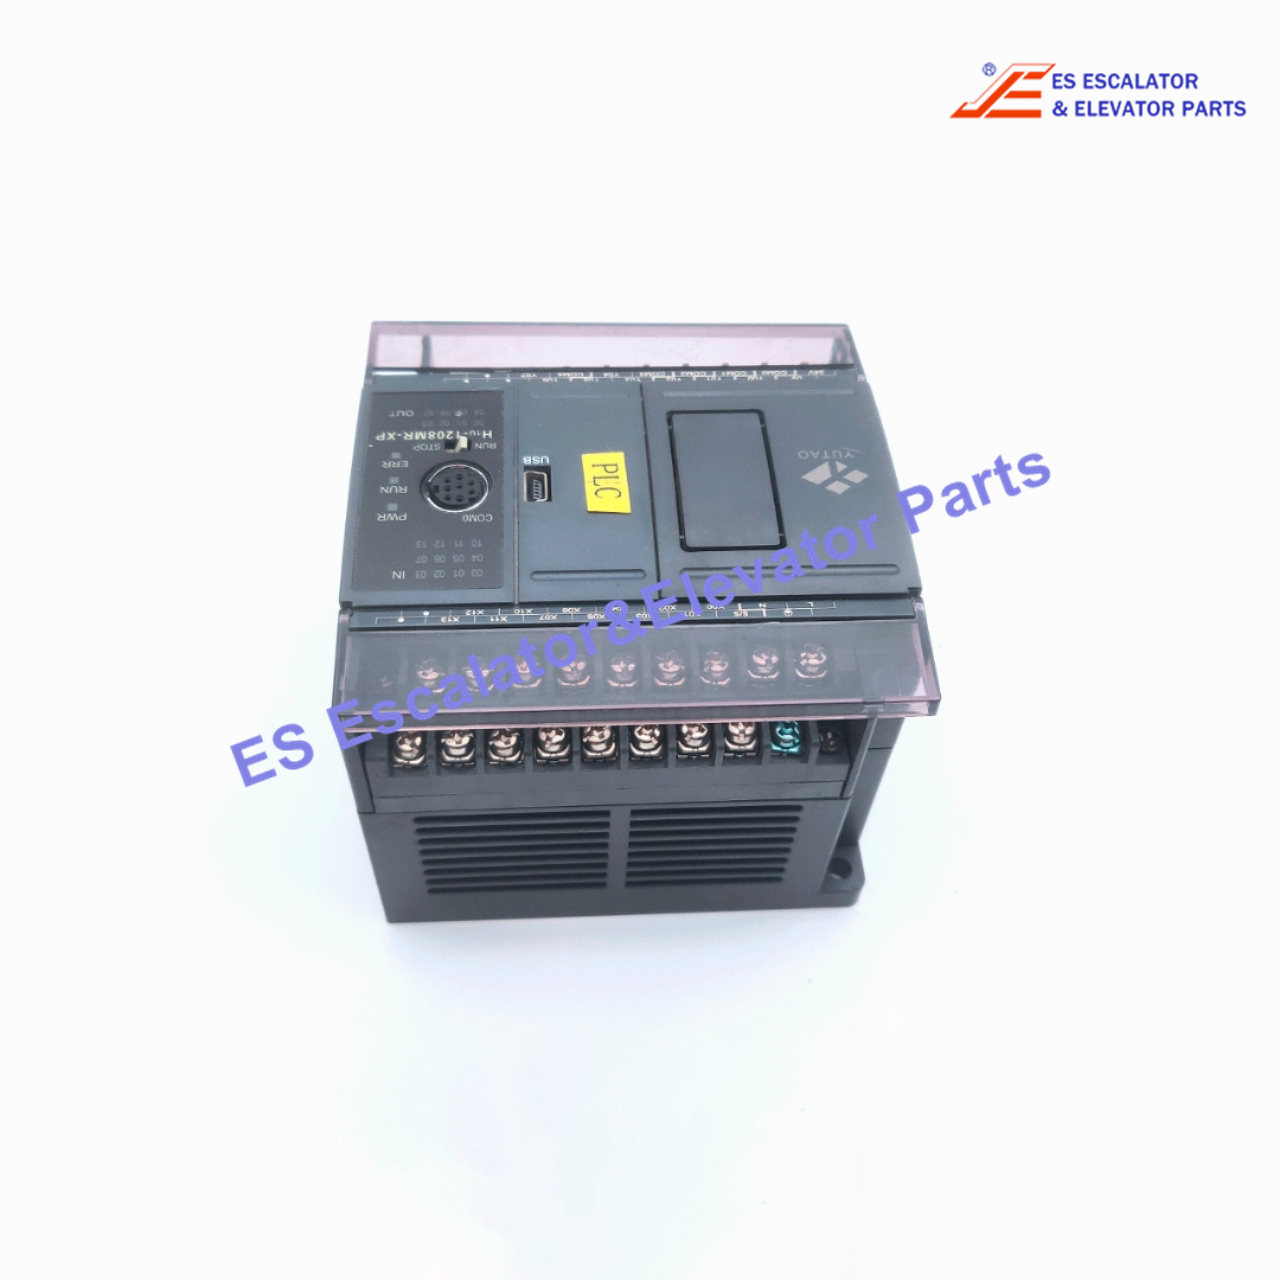 H1U-1208MR-XP-YT Escalator Controller  IN:100-240VAC OUT:30VDC/250VAC For Fuji Plc Programmable Logic Controller  Use For Fuji